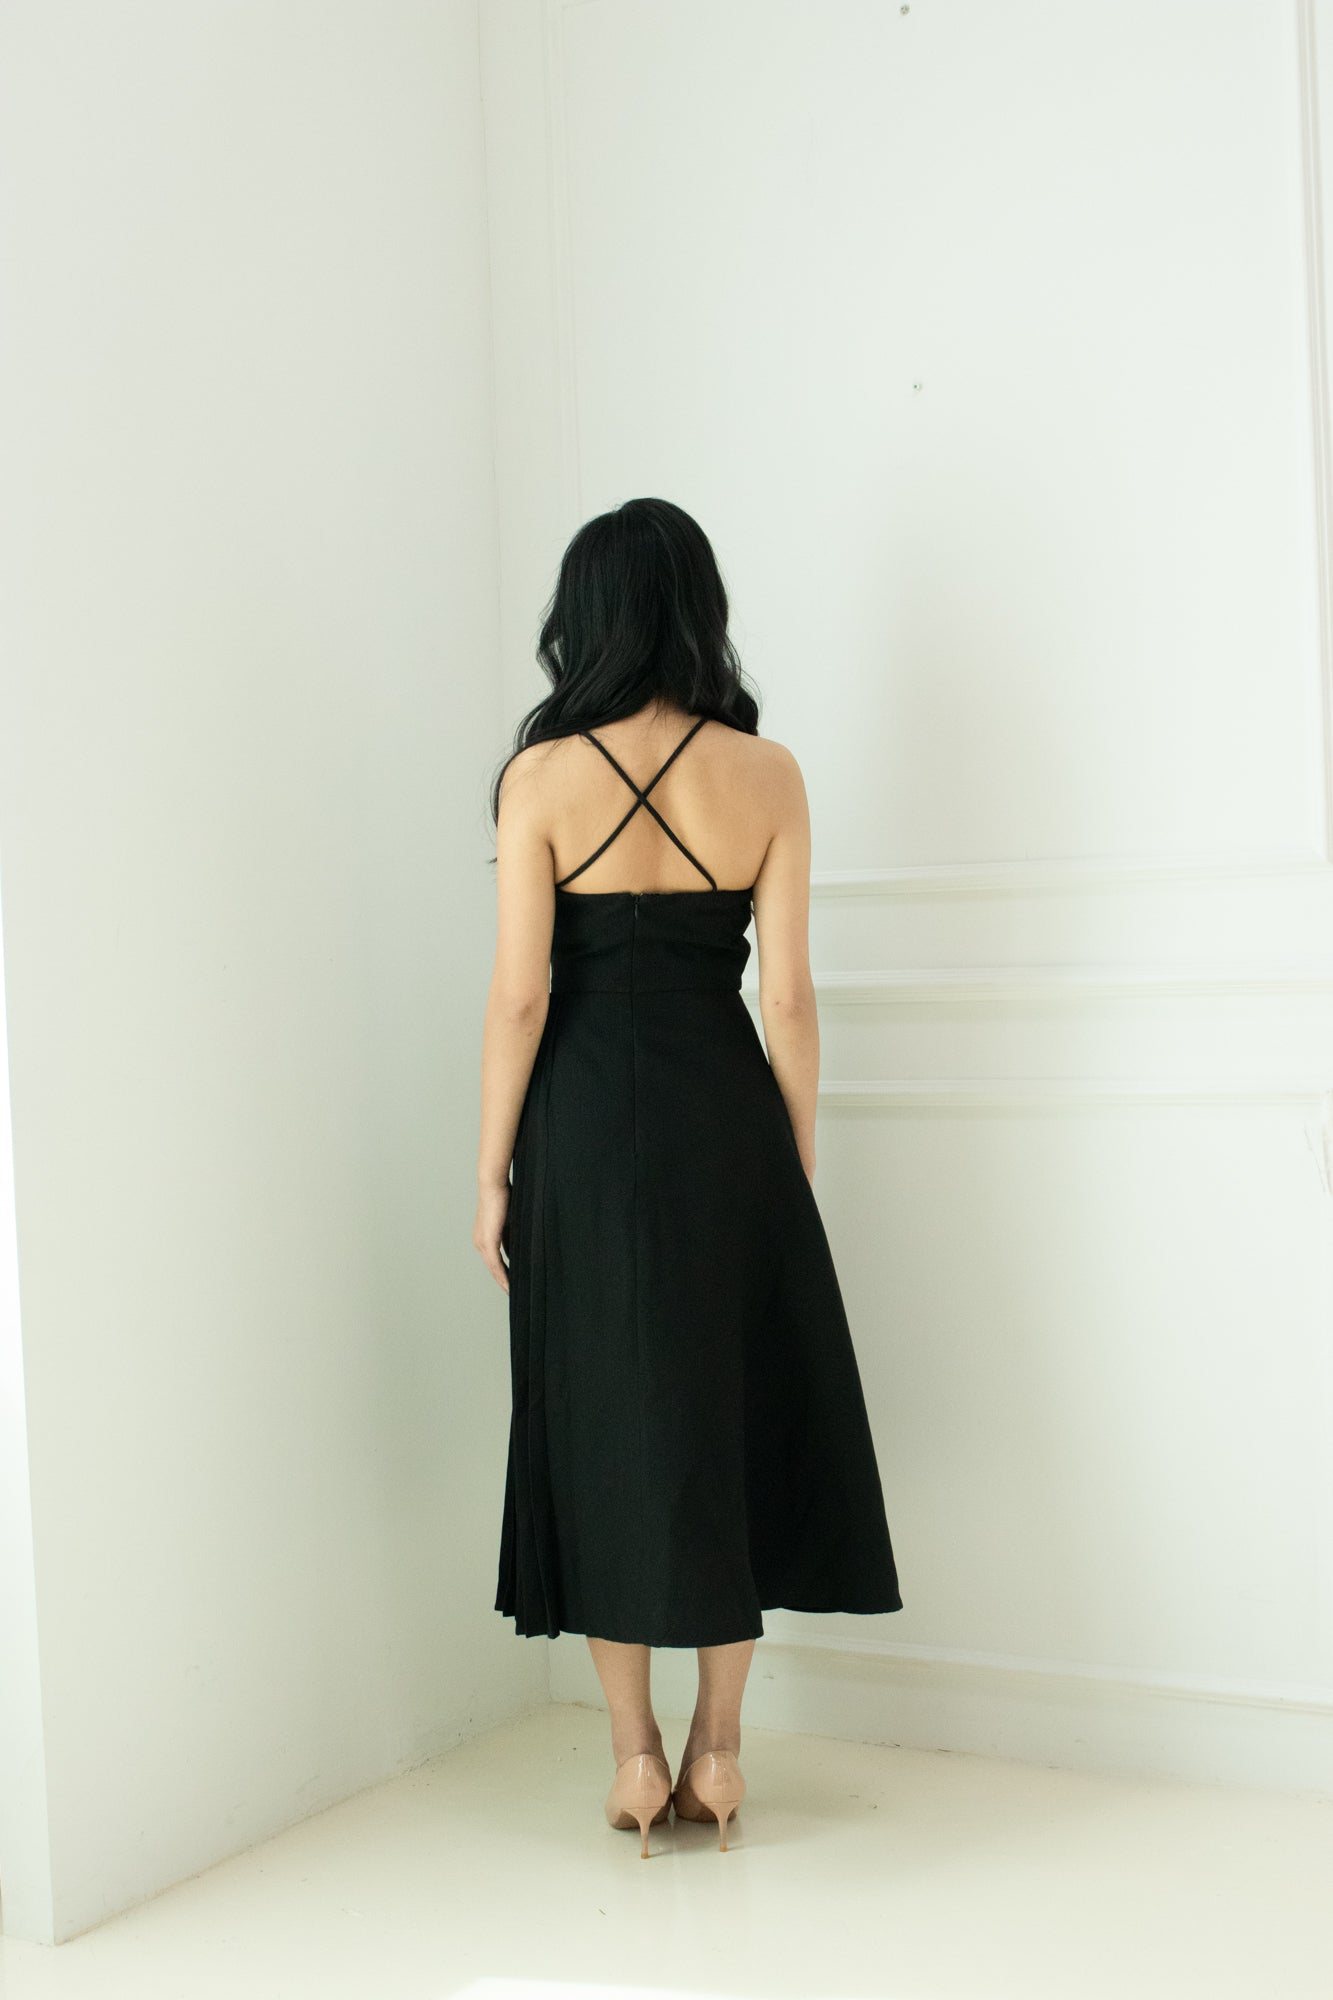 Seraphina Pleated Dress in Black